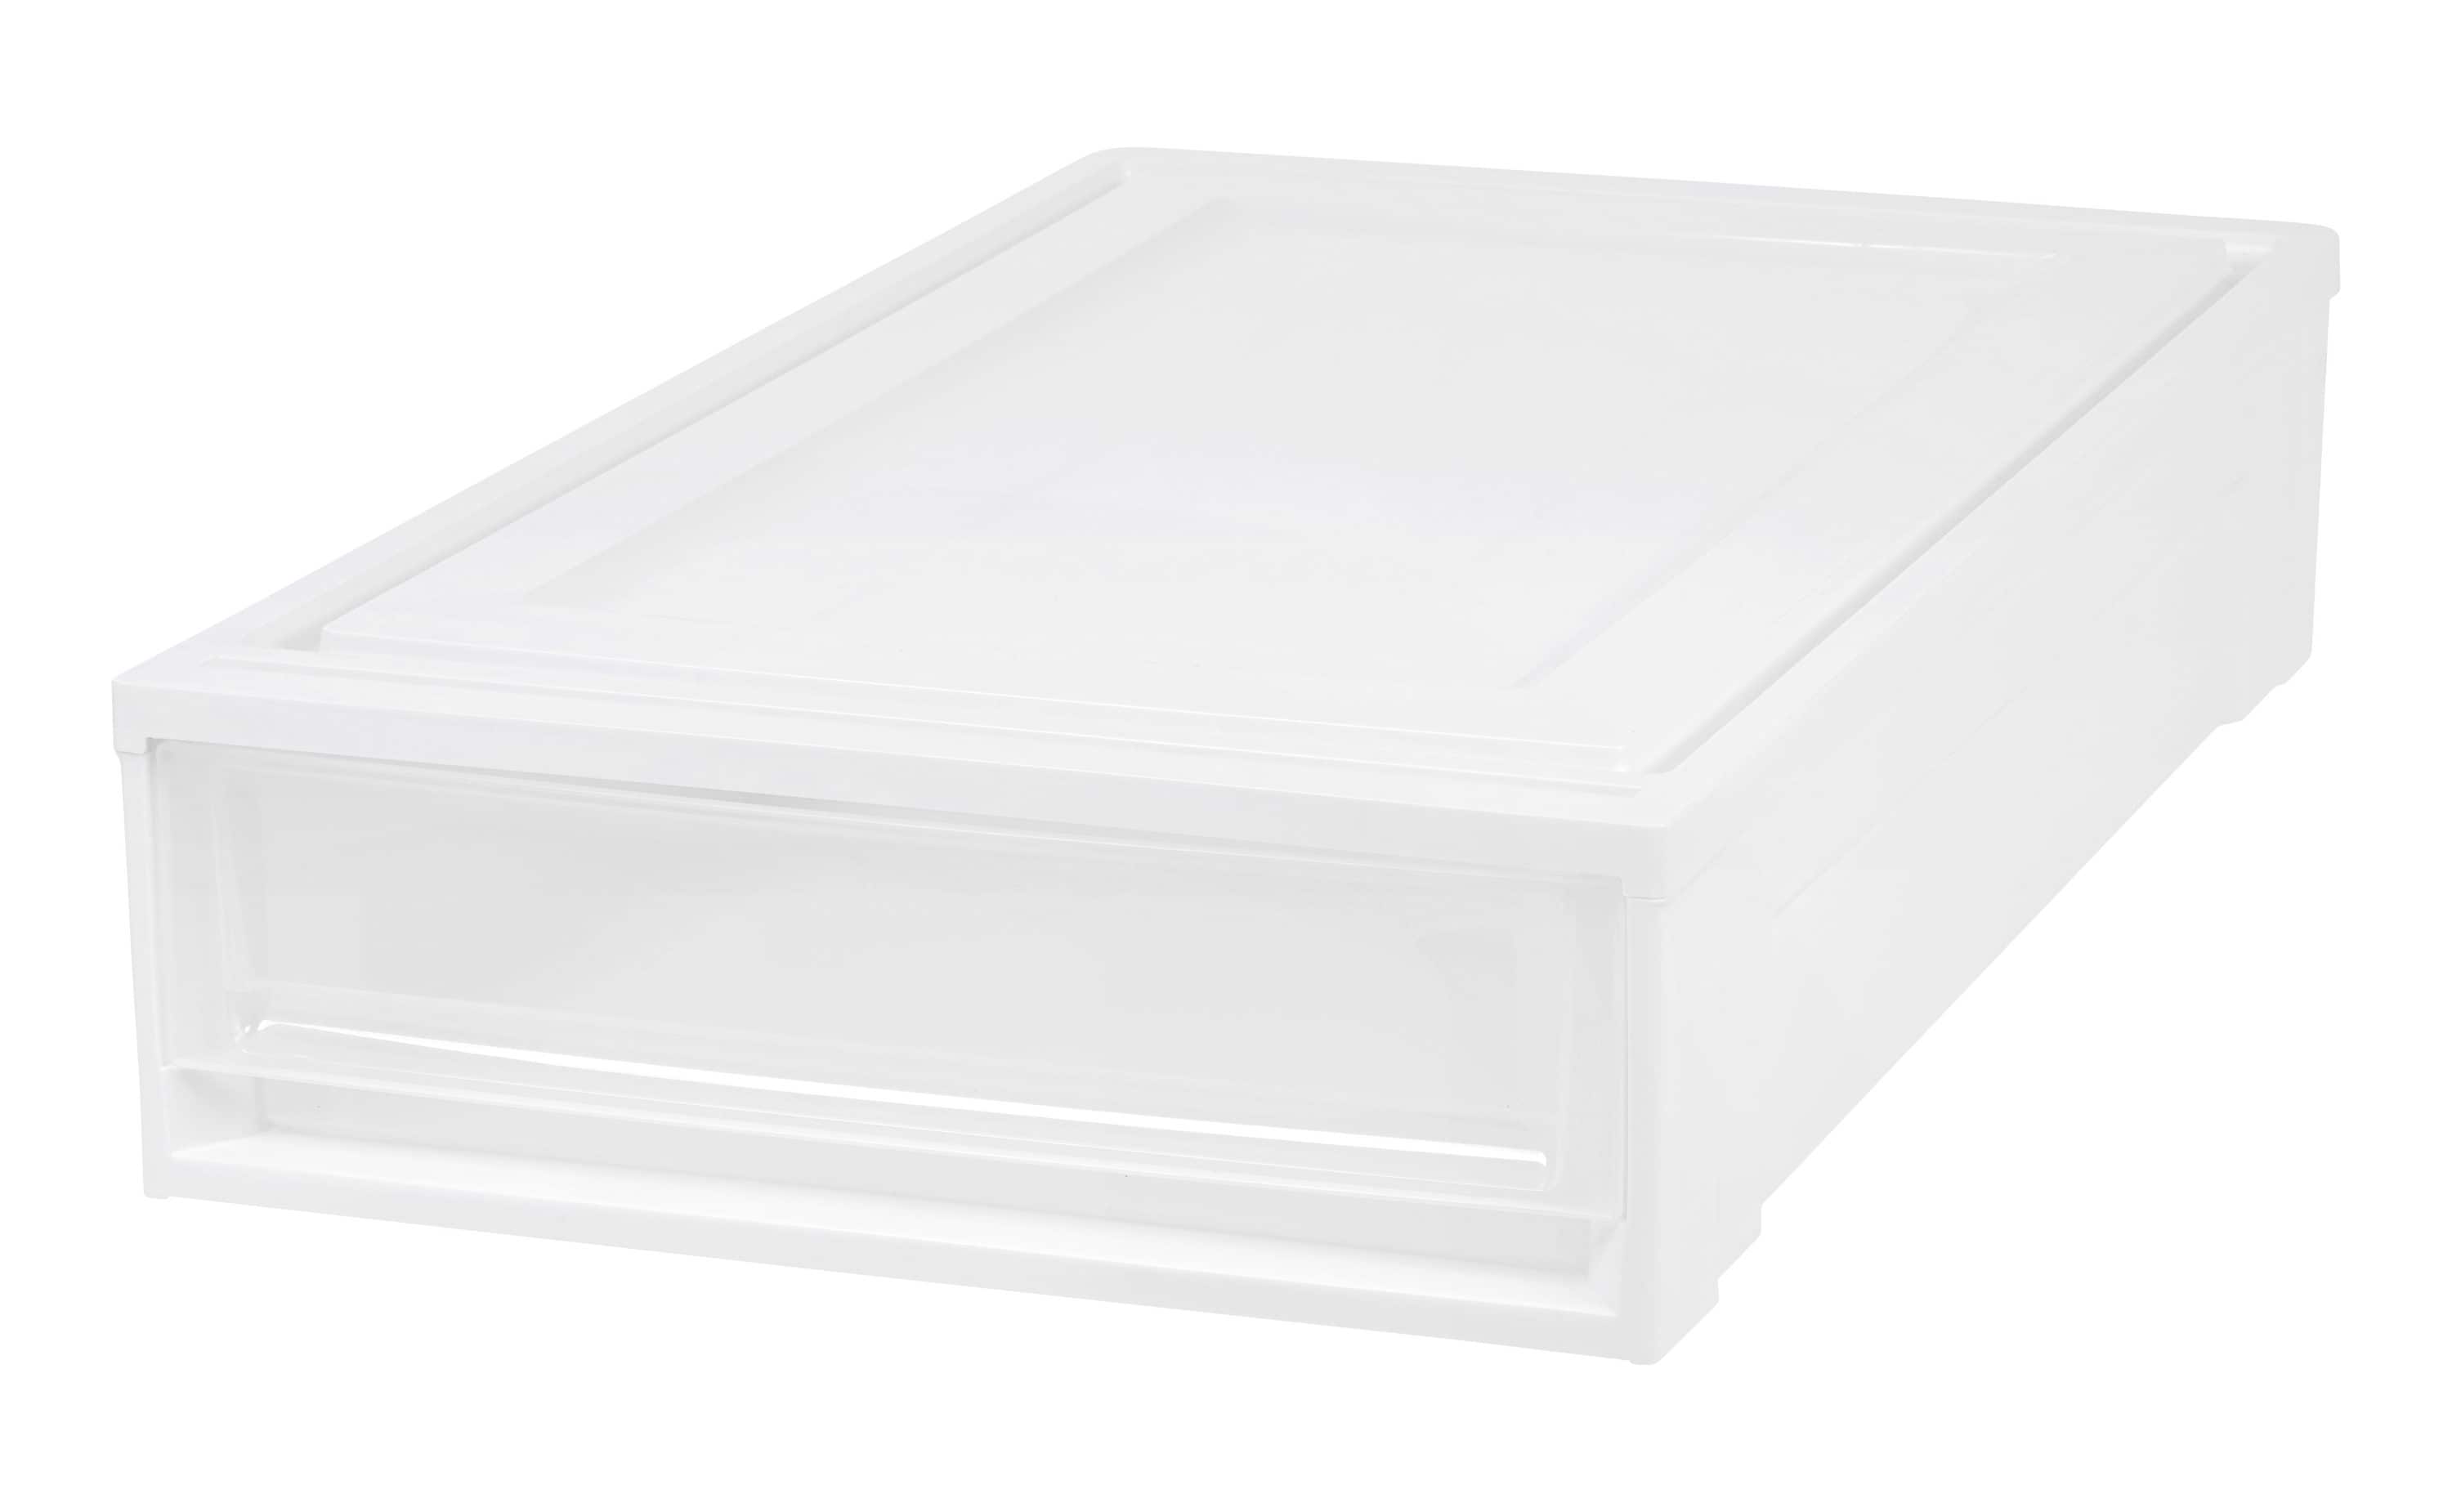  IRIS USA 44qt Plastic Clear Stackable Shallow Storage Drawers  Chest Box : Home & Kitchen